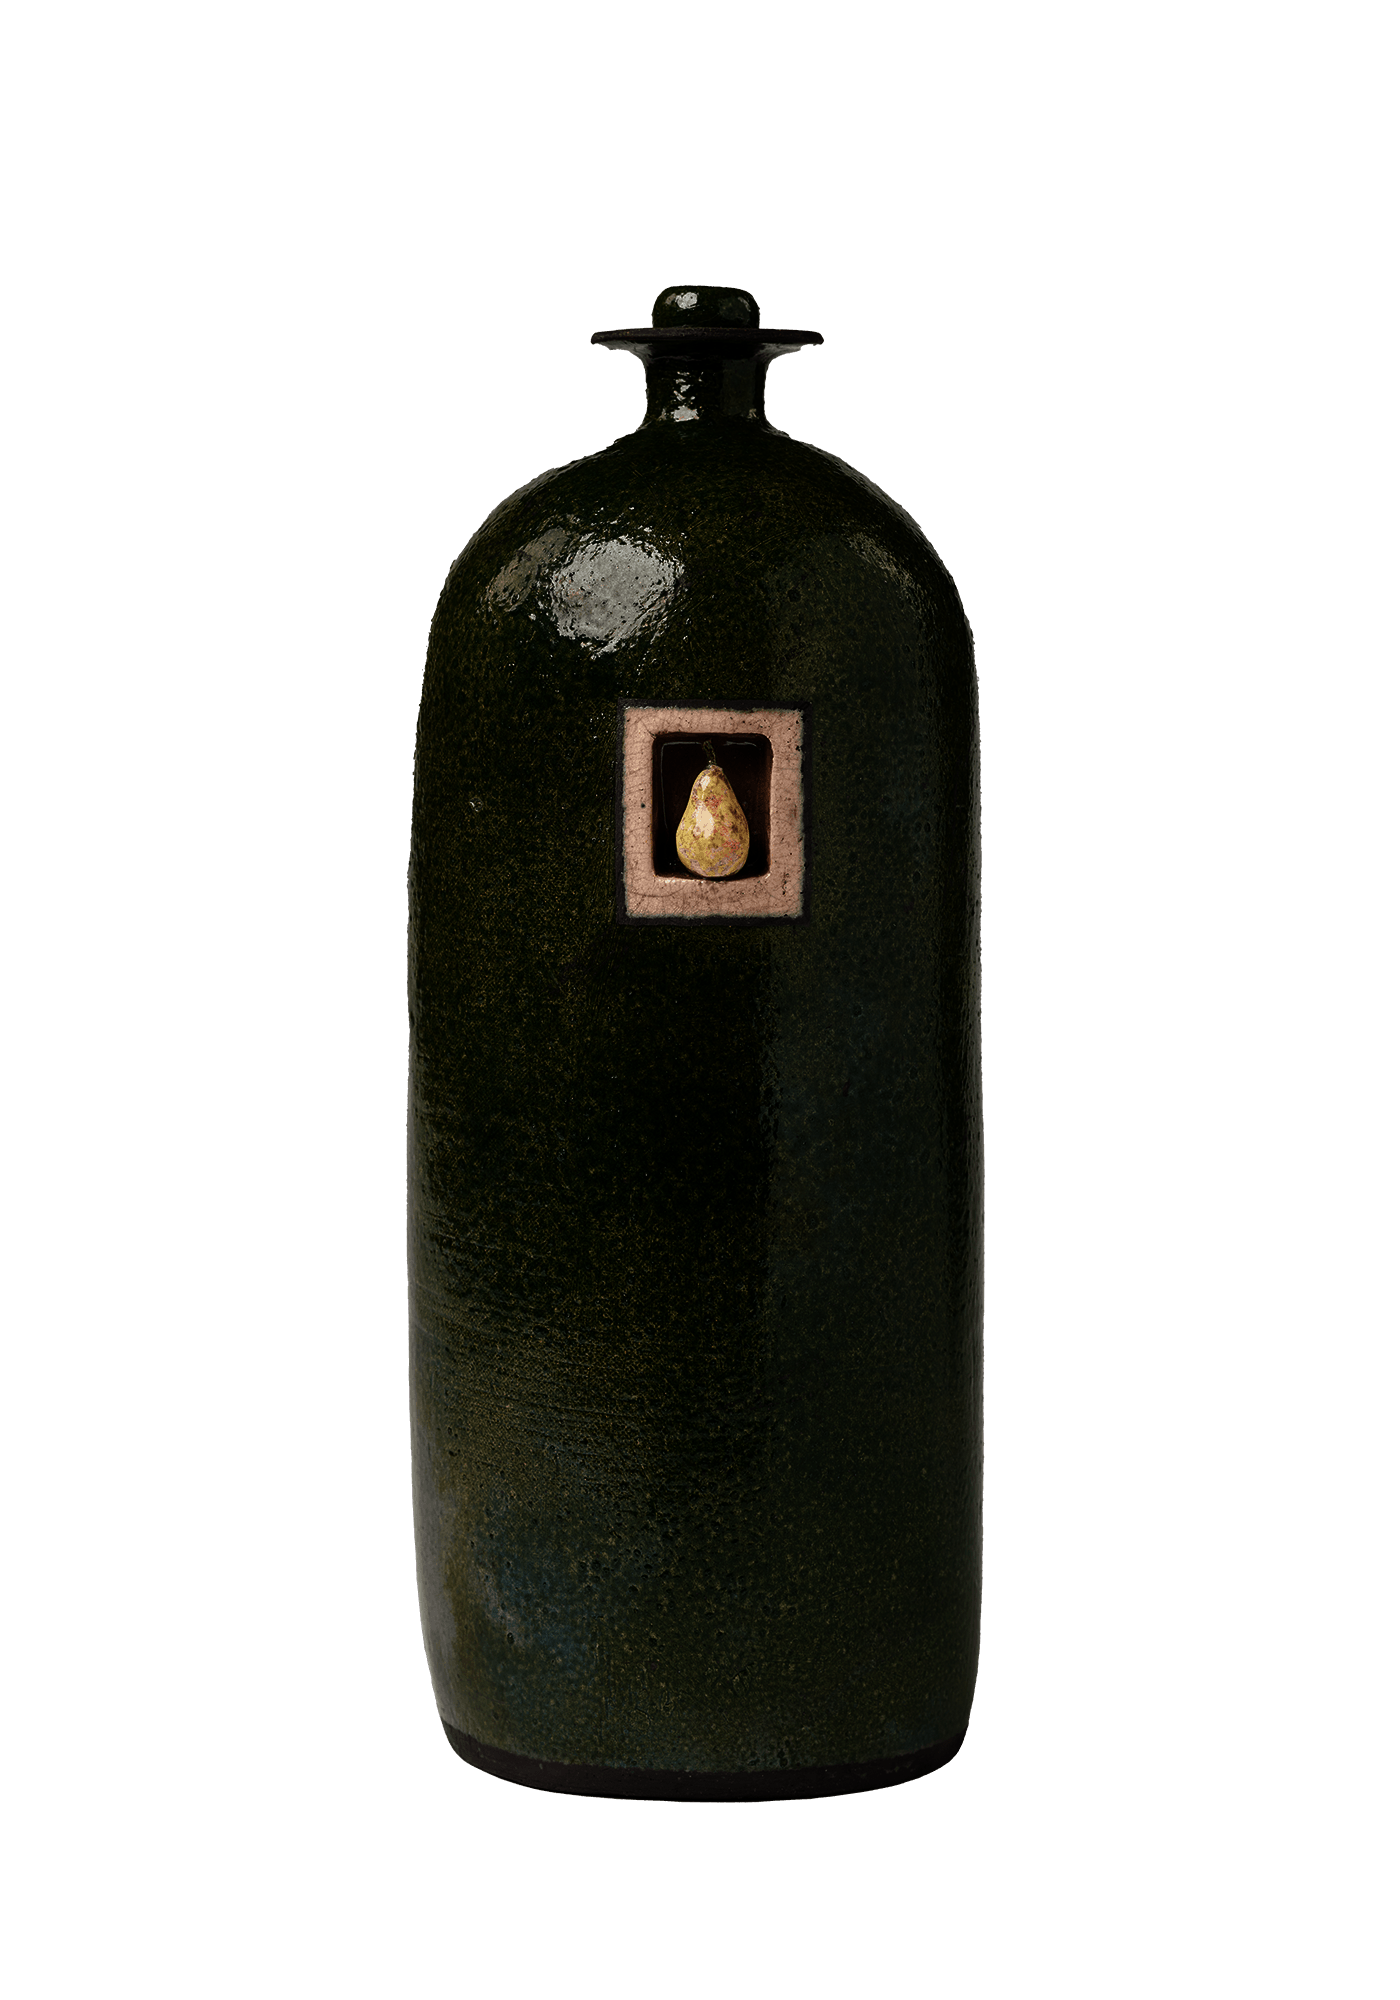 Dark green earthenware bottle with a small square framing a pear on the side